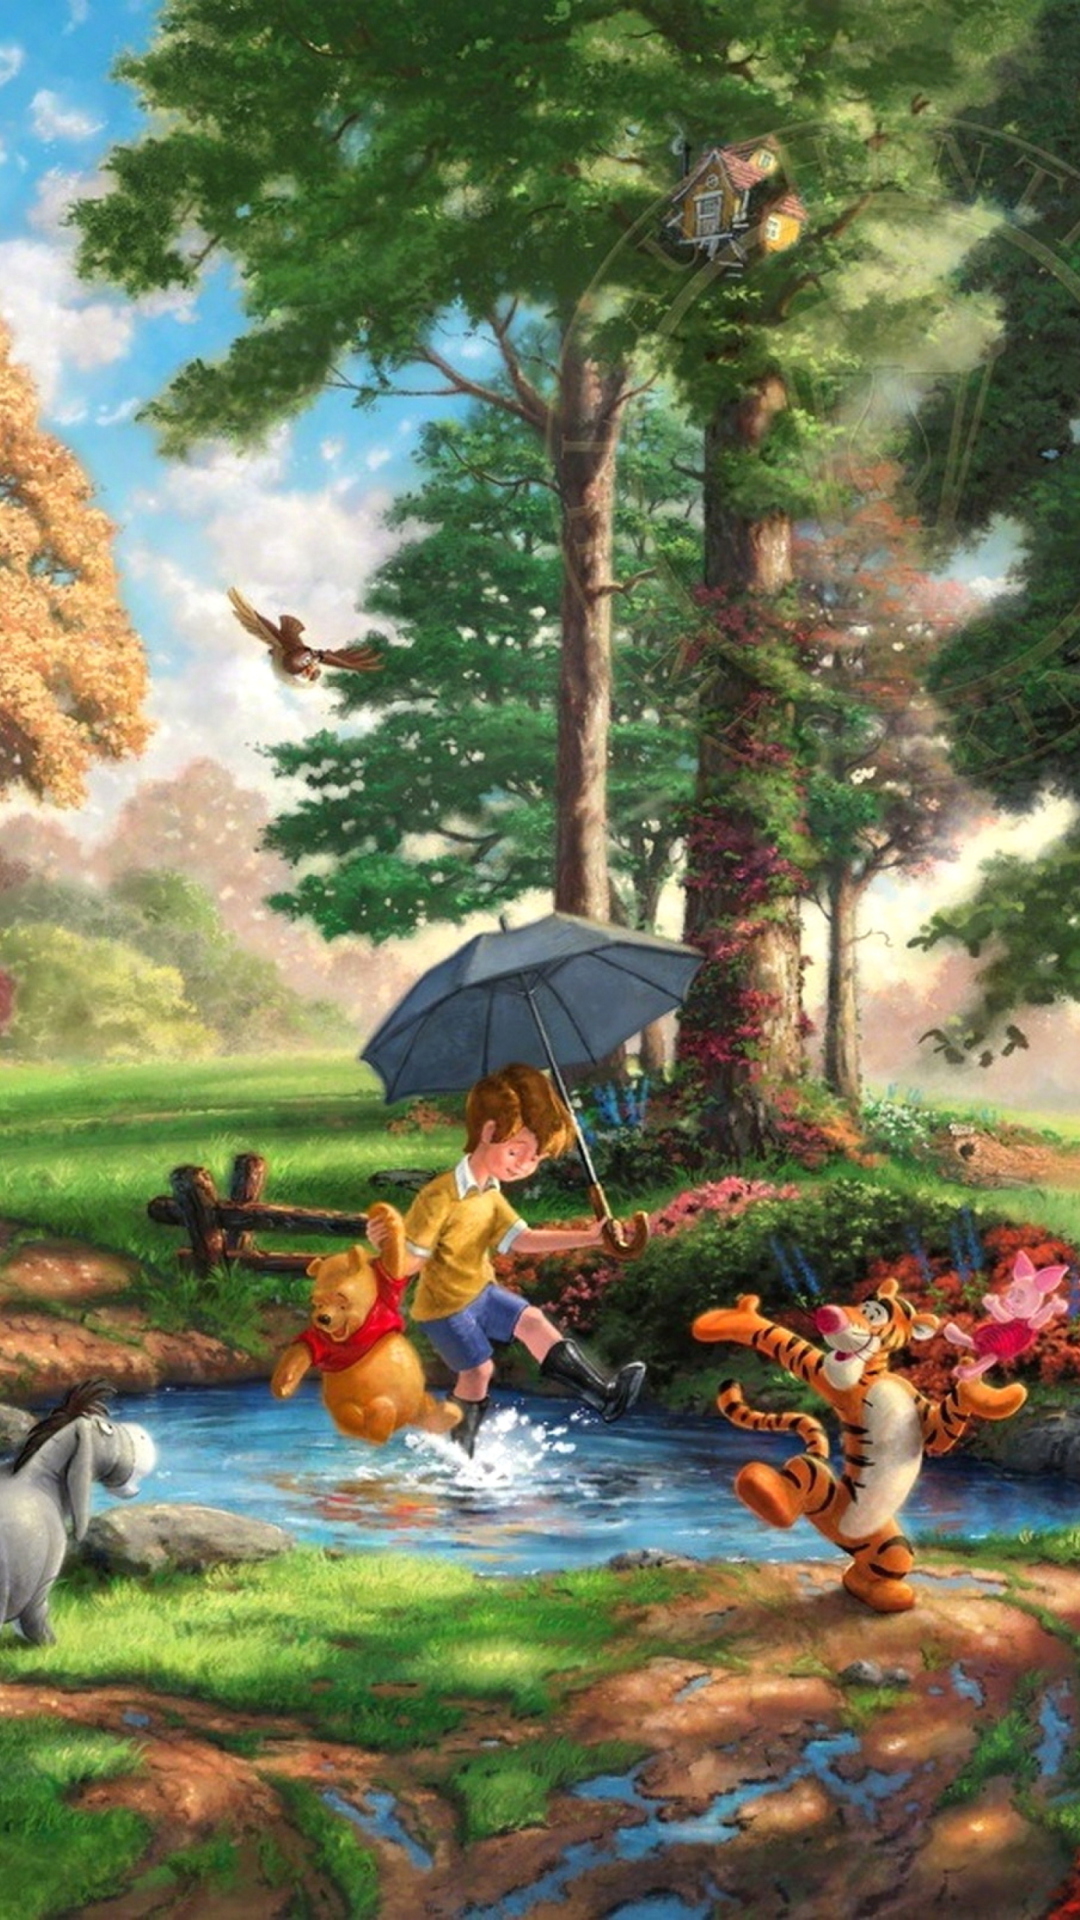 Winnie The Pooh And Friends wallpaper 1080x1920